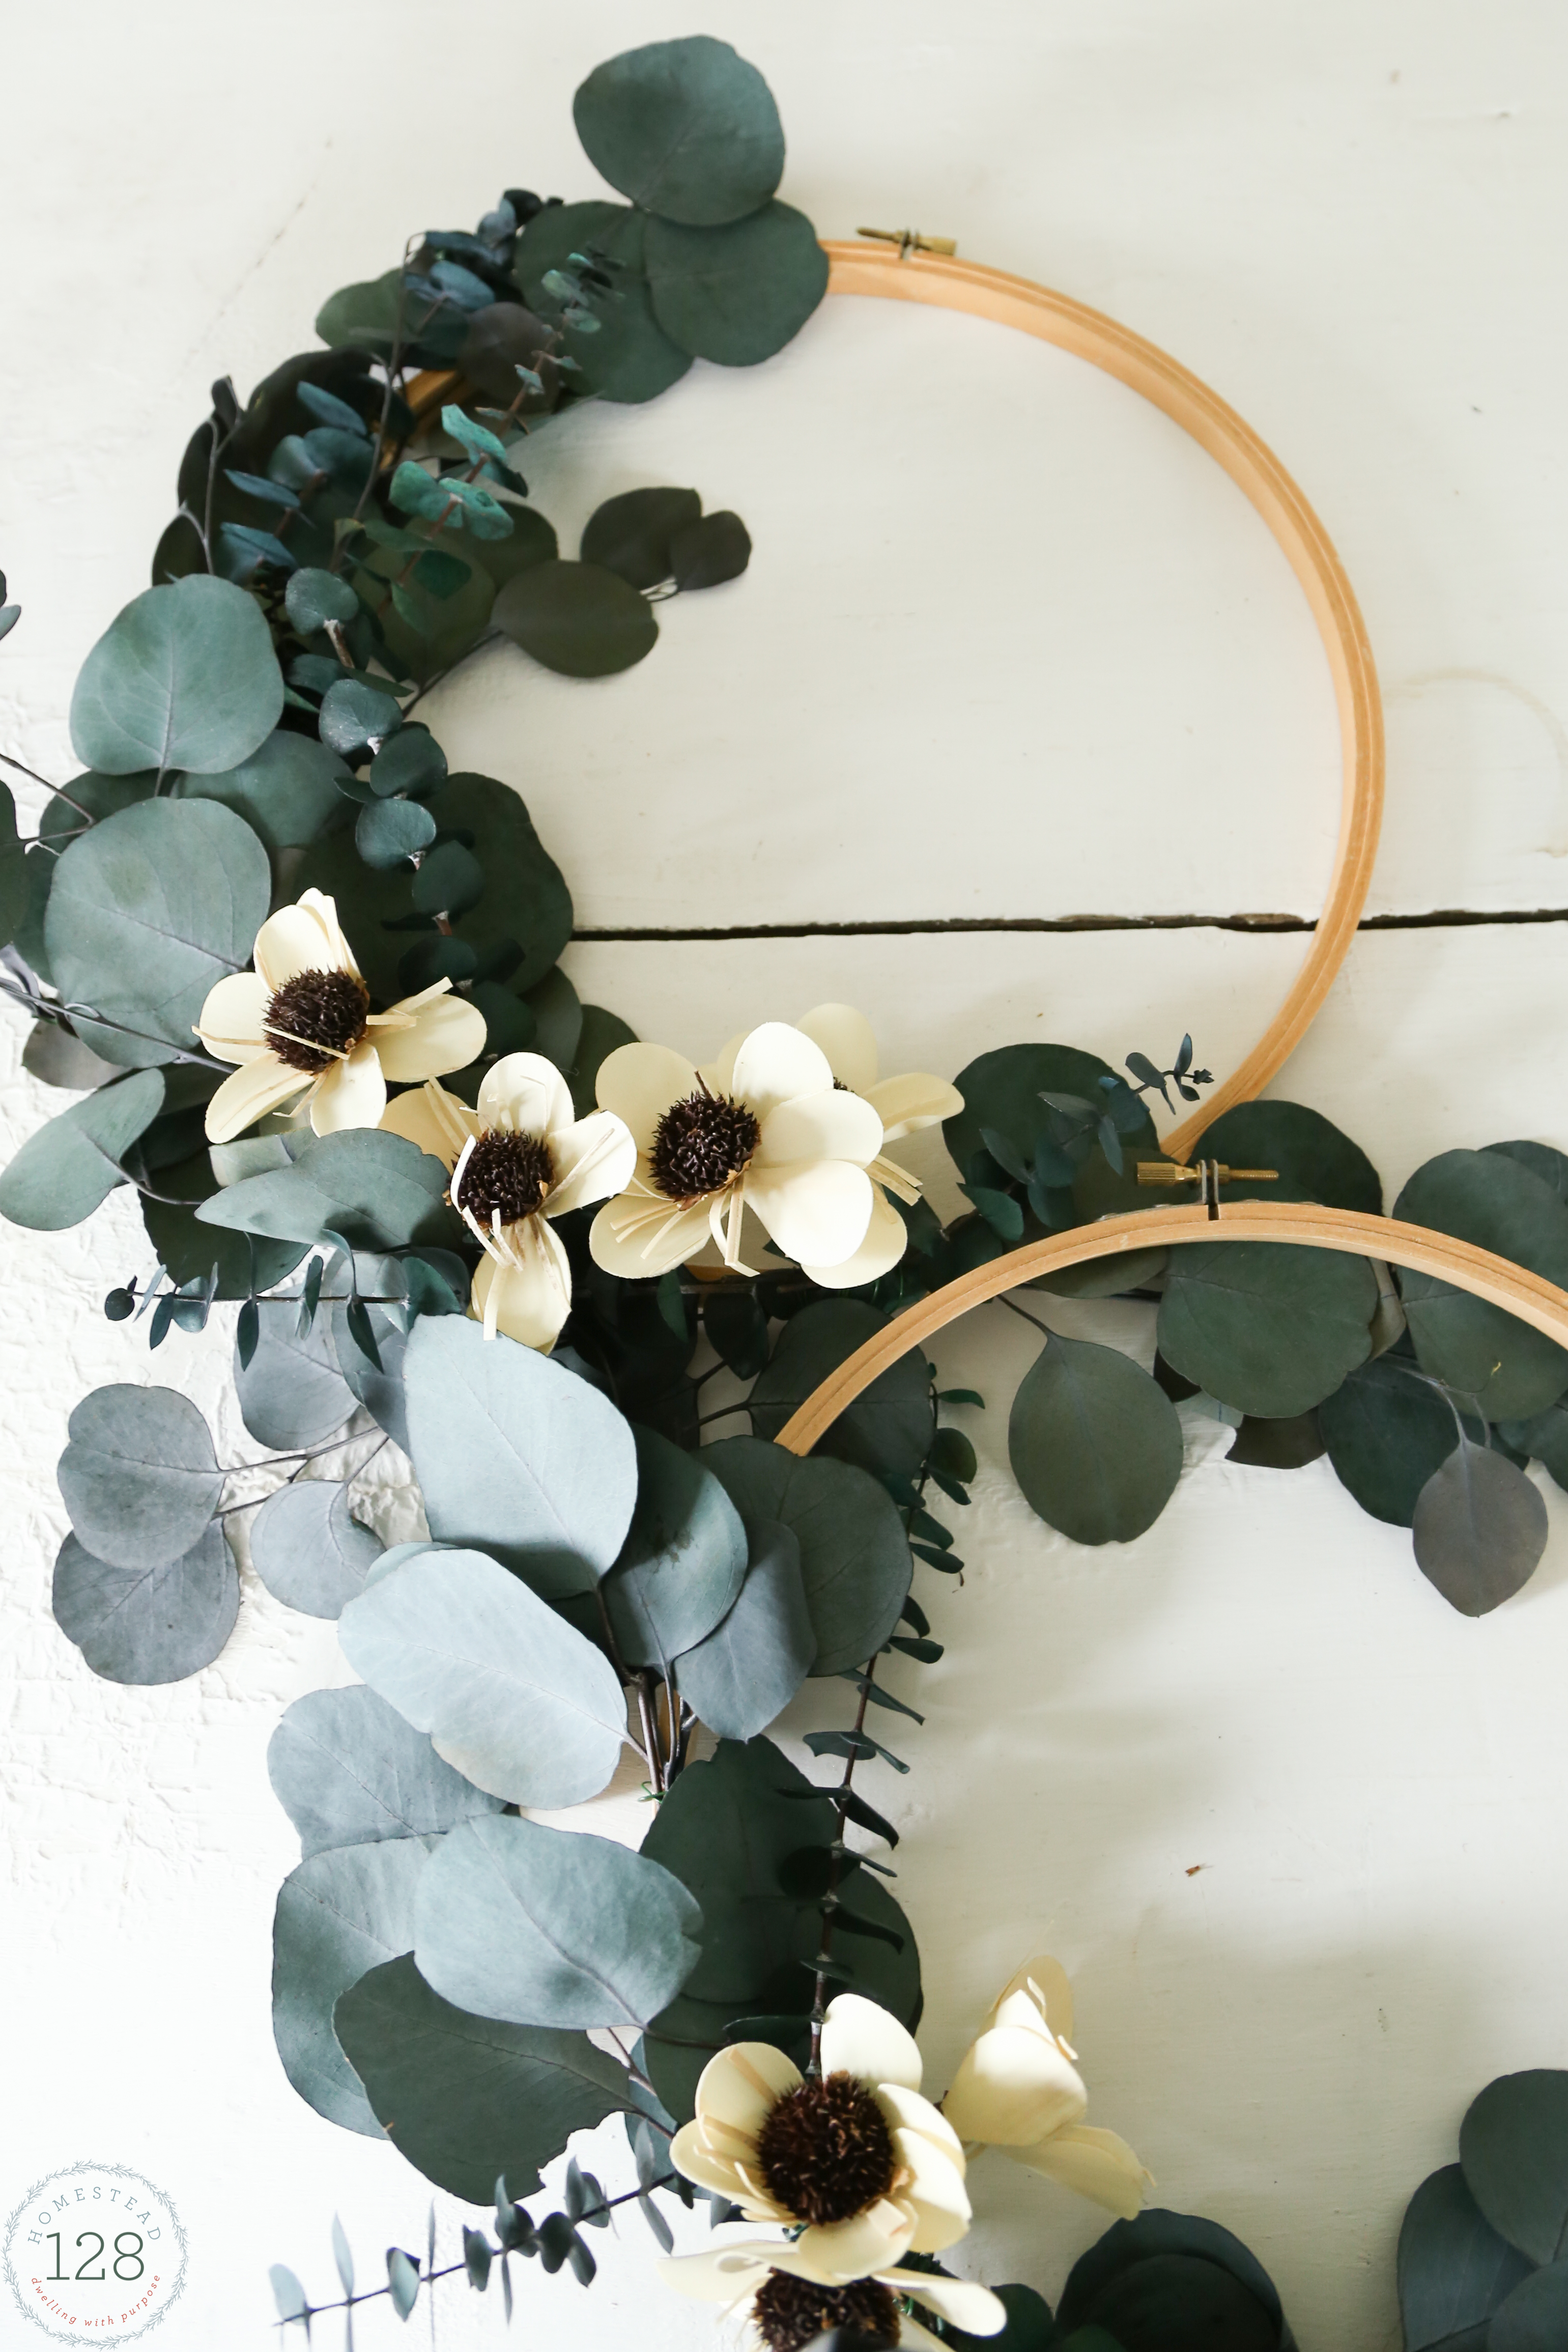 Create a wreath for the season with an embroidery hoop and dried natural stems.